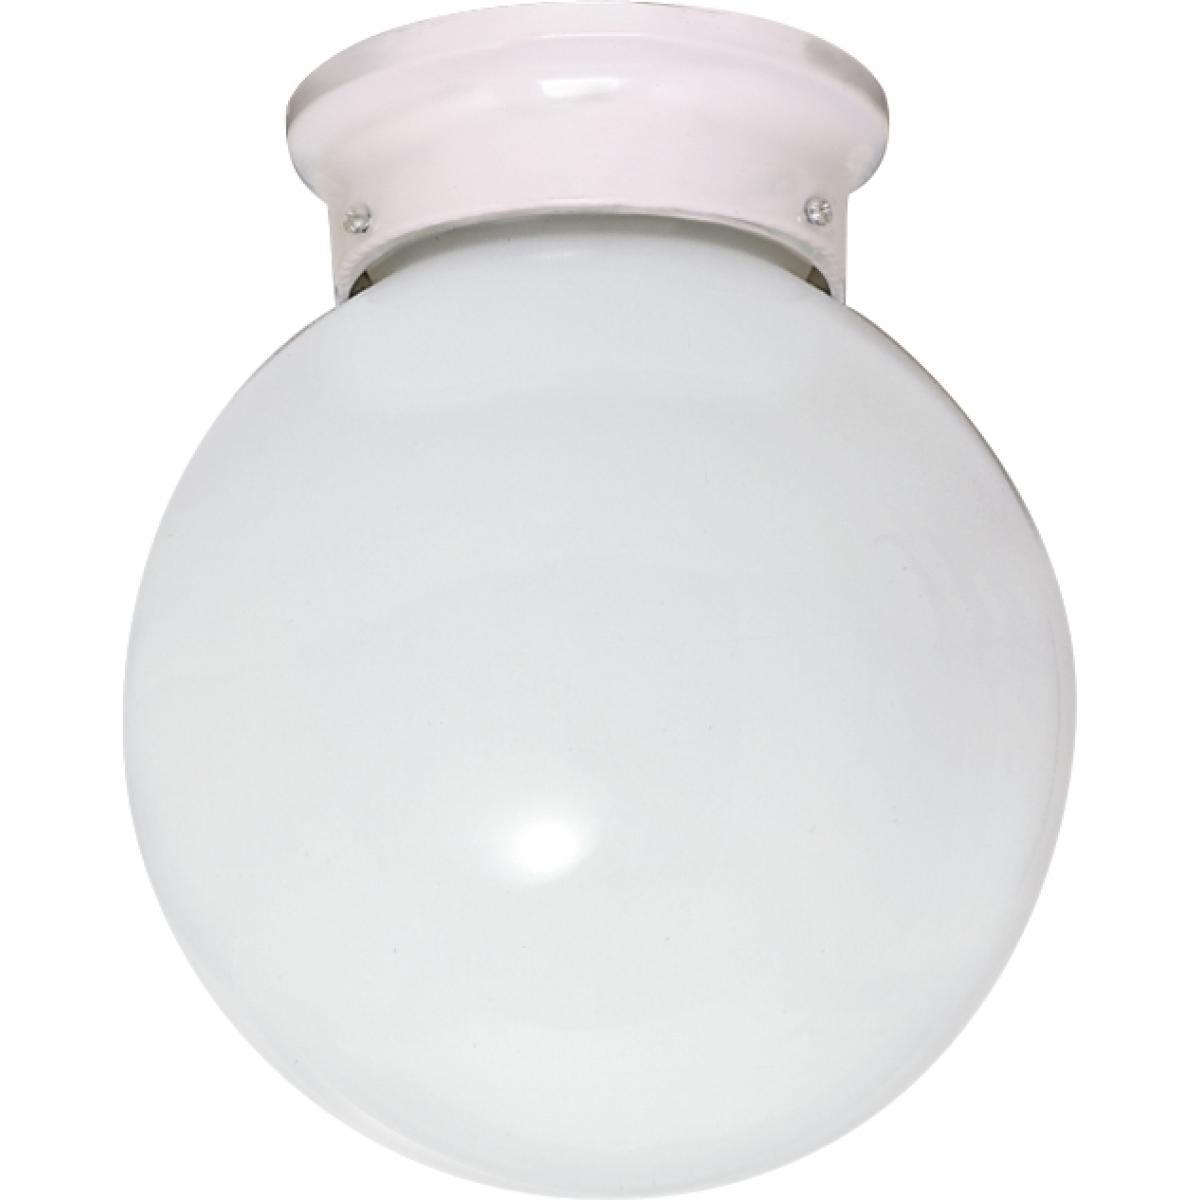 8" Ceiling Fixture White Ball Ceiling Nuvo Lighting 